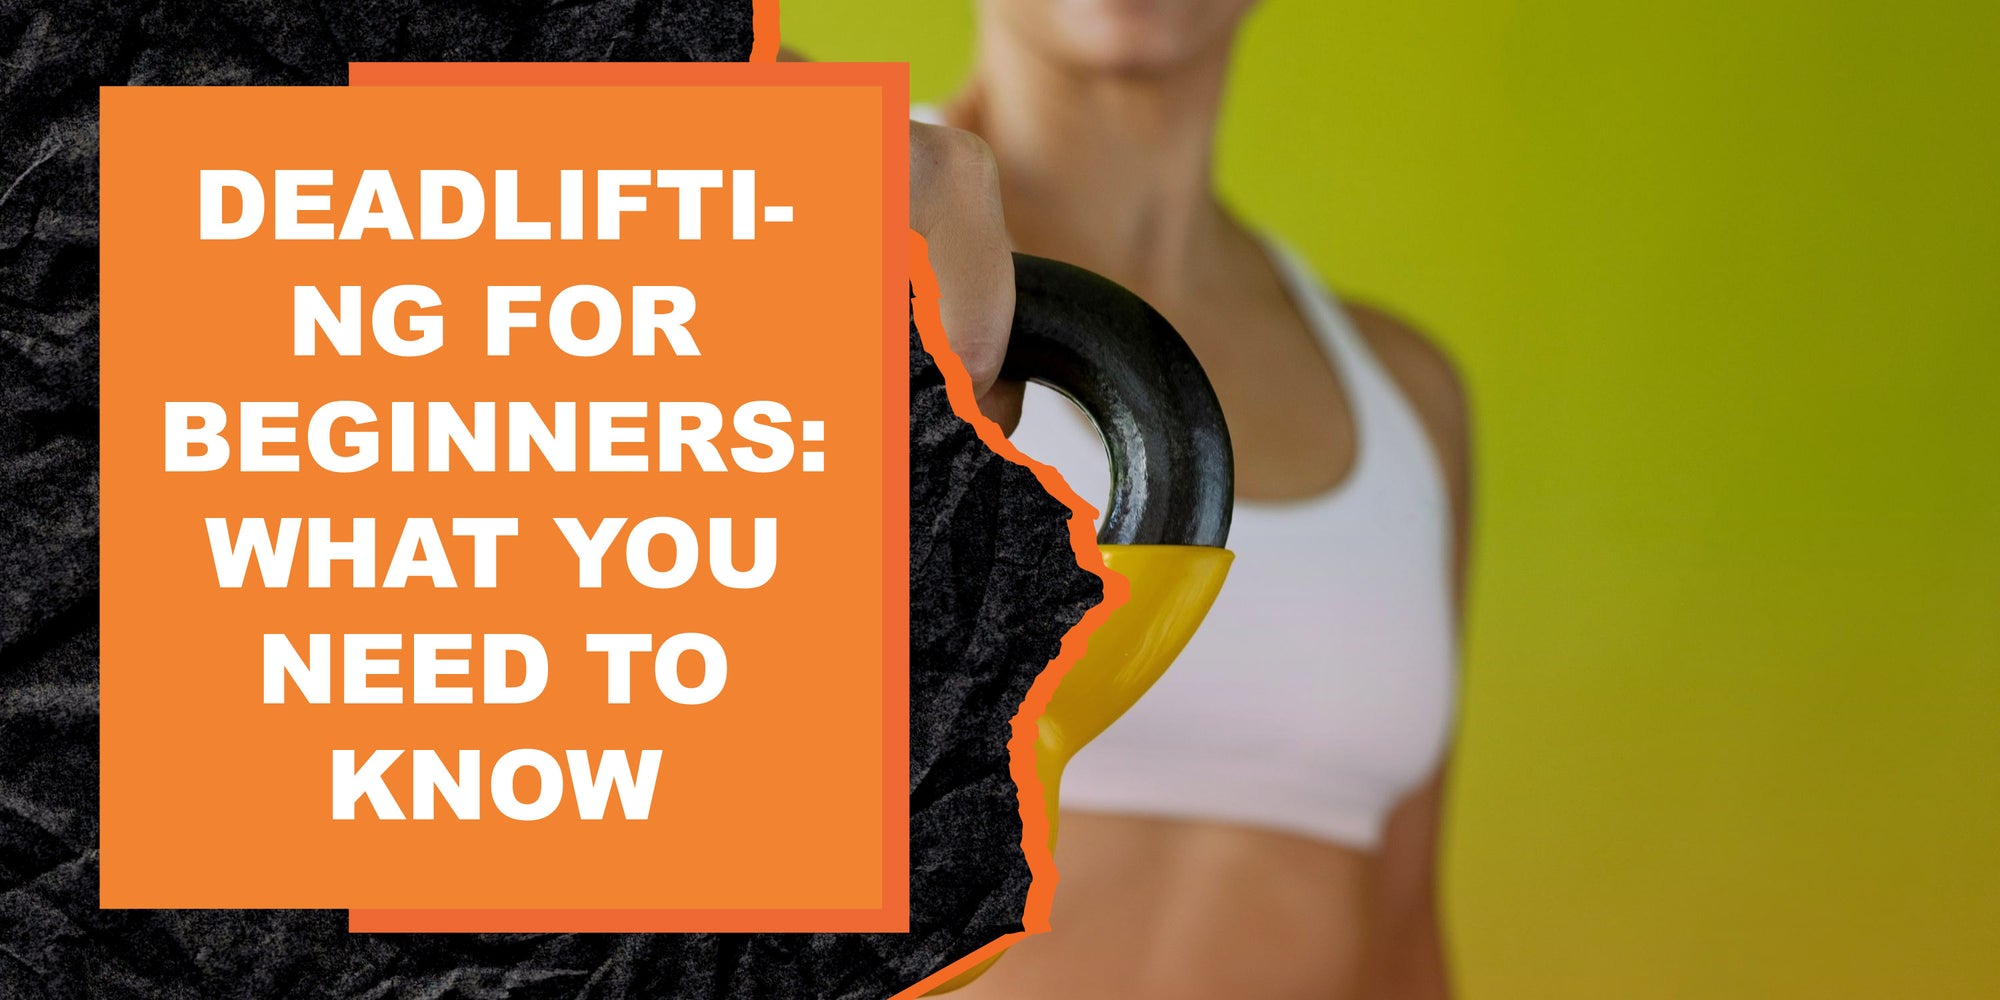 Deadlifting for Beginners: What You Need to Know